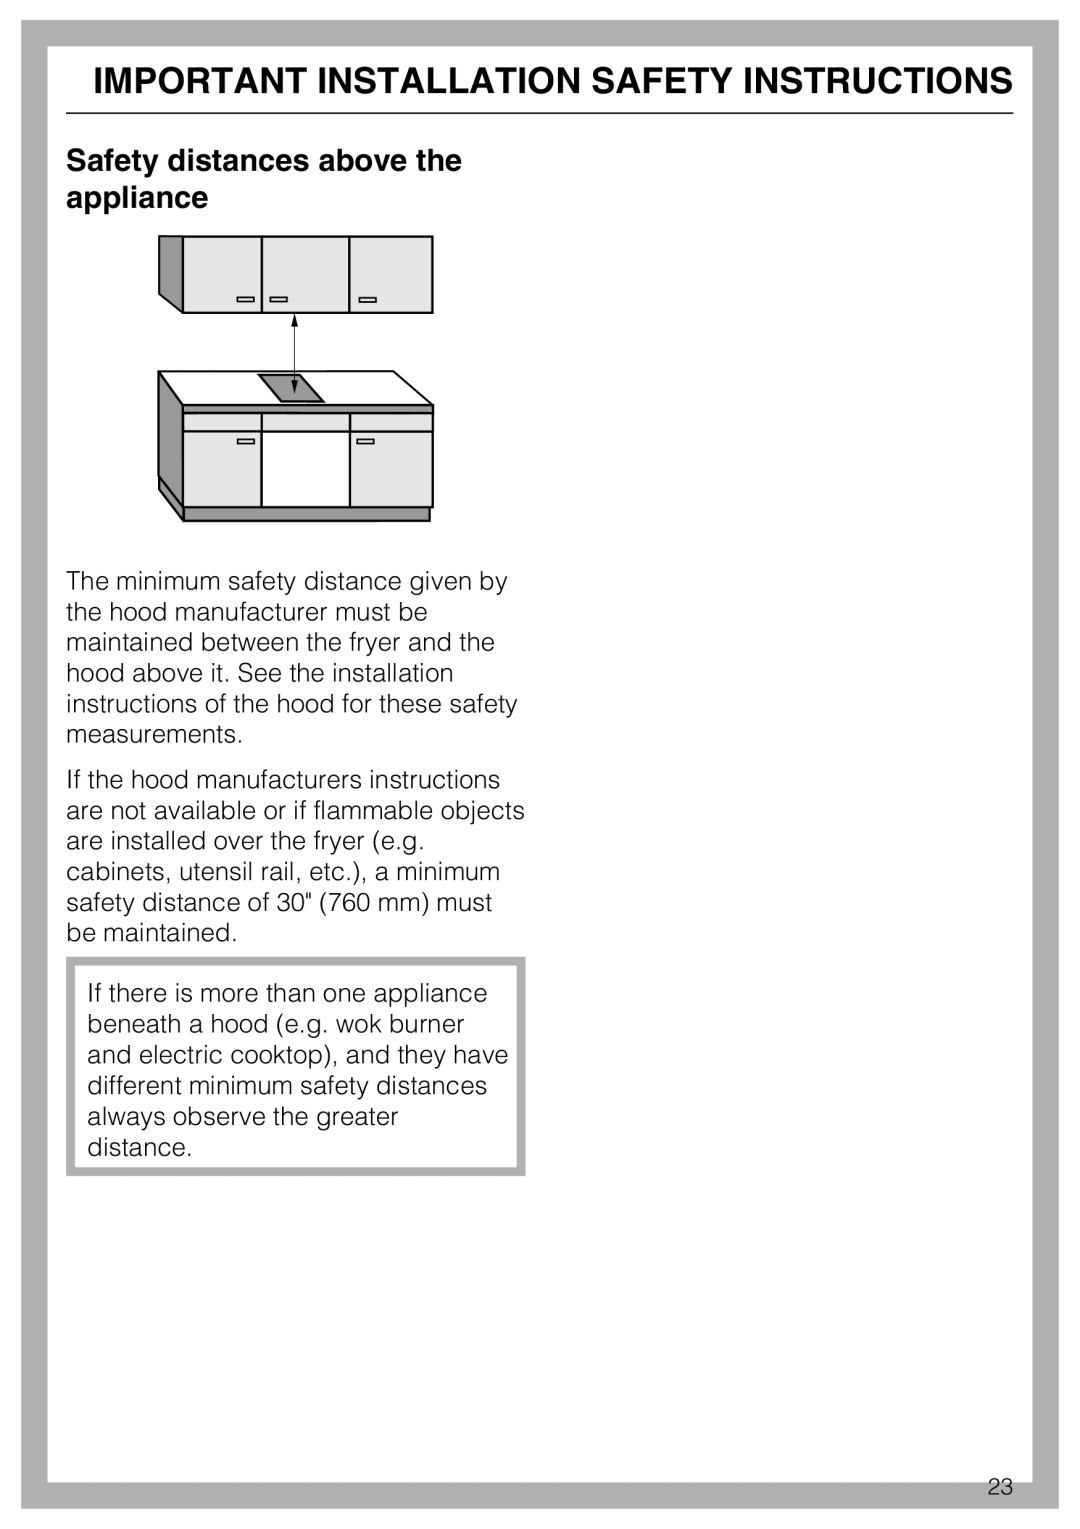 Miele CS1411 installation instructions Safety distances above the appliance, Important Installation Safety Instructions 